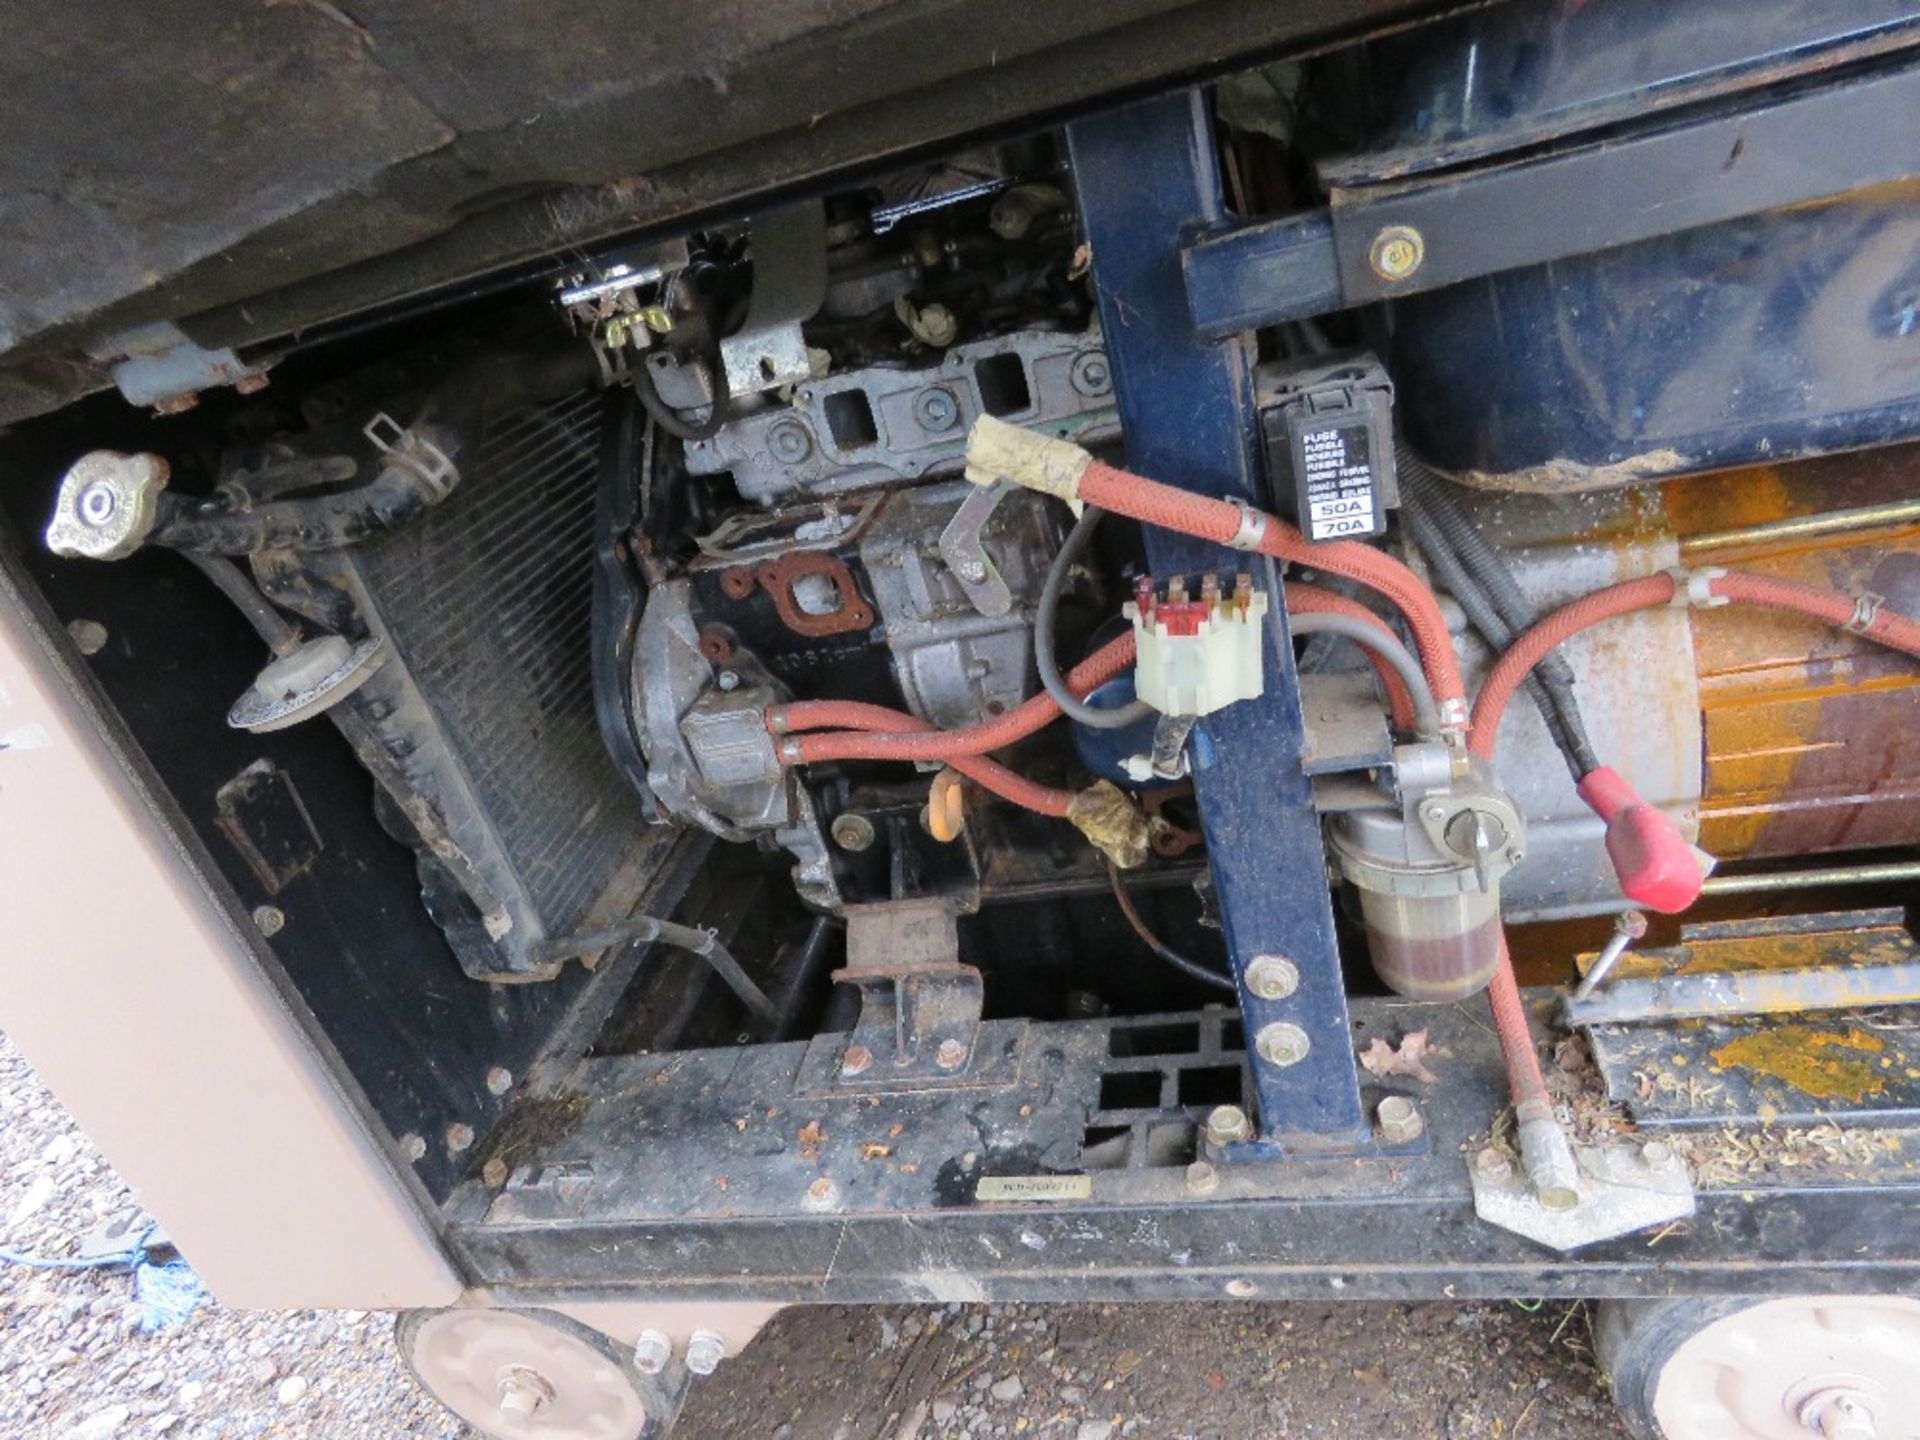 HONDA EX10D WHEELED 10KVA GENERATOR. SPARES/REPAIR AS APPEARS INCOMPLETE, SEE IMAGES. - Image 4 of 5